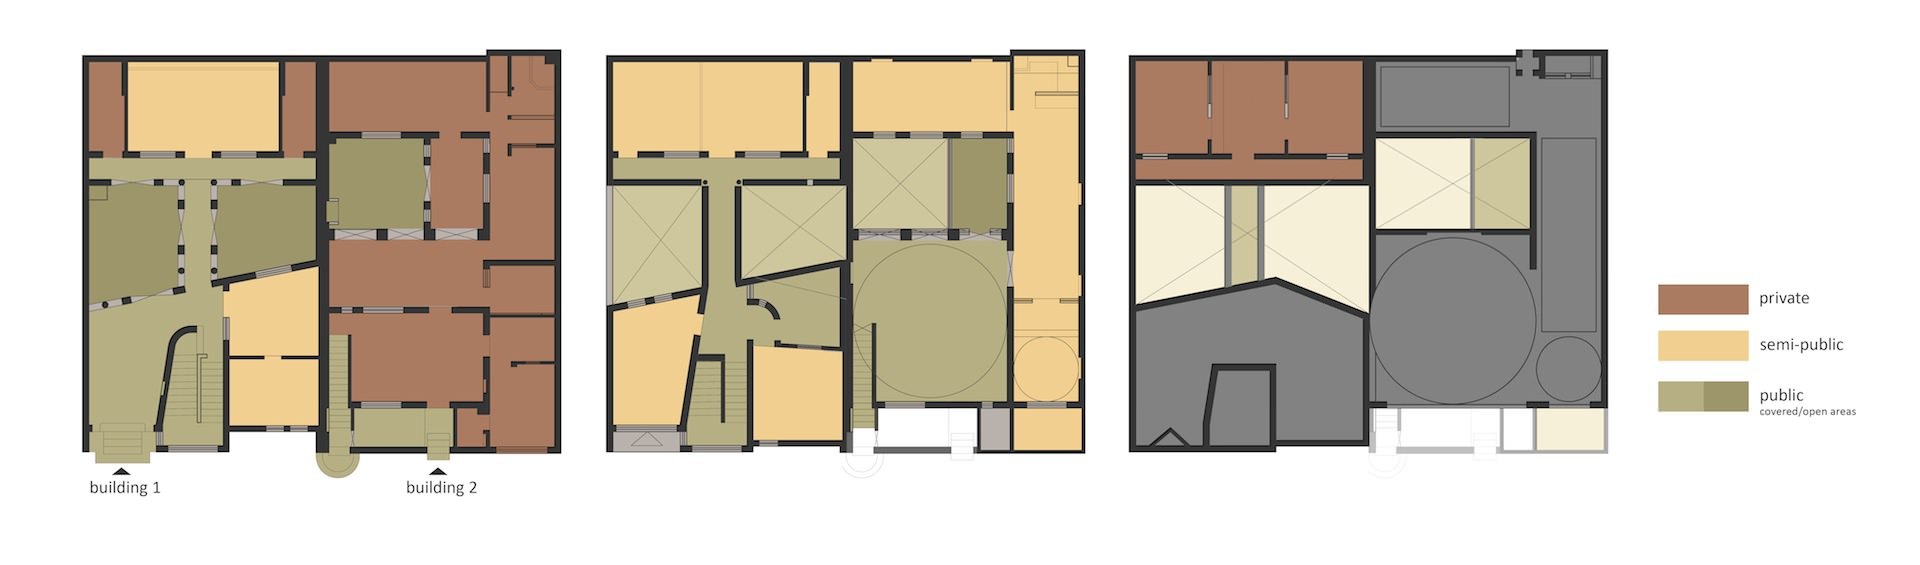 Plans of the existing buildings. (Image: Lotus Design)